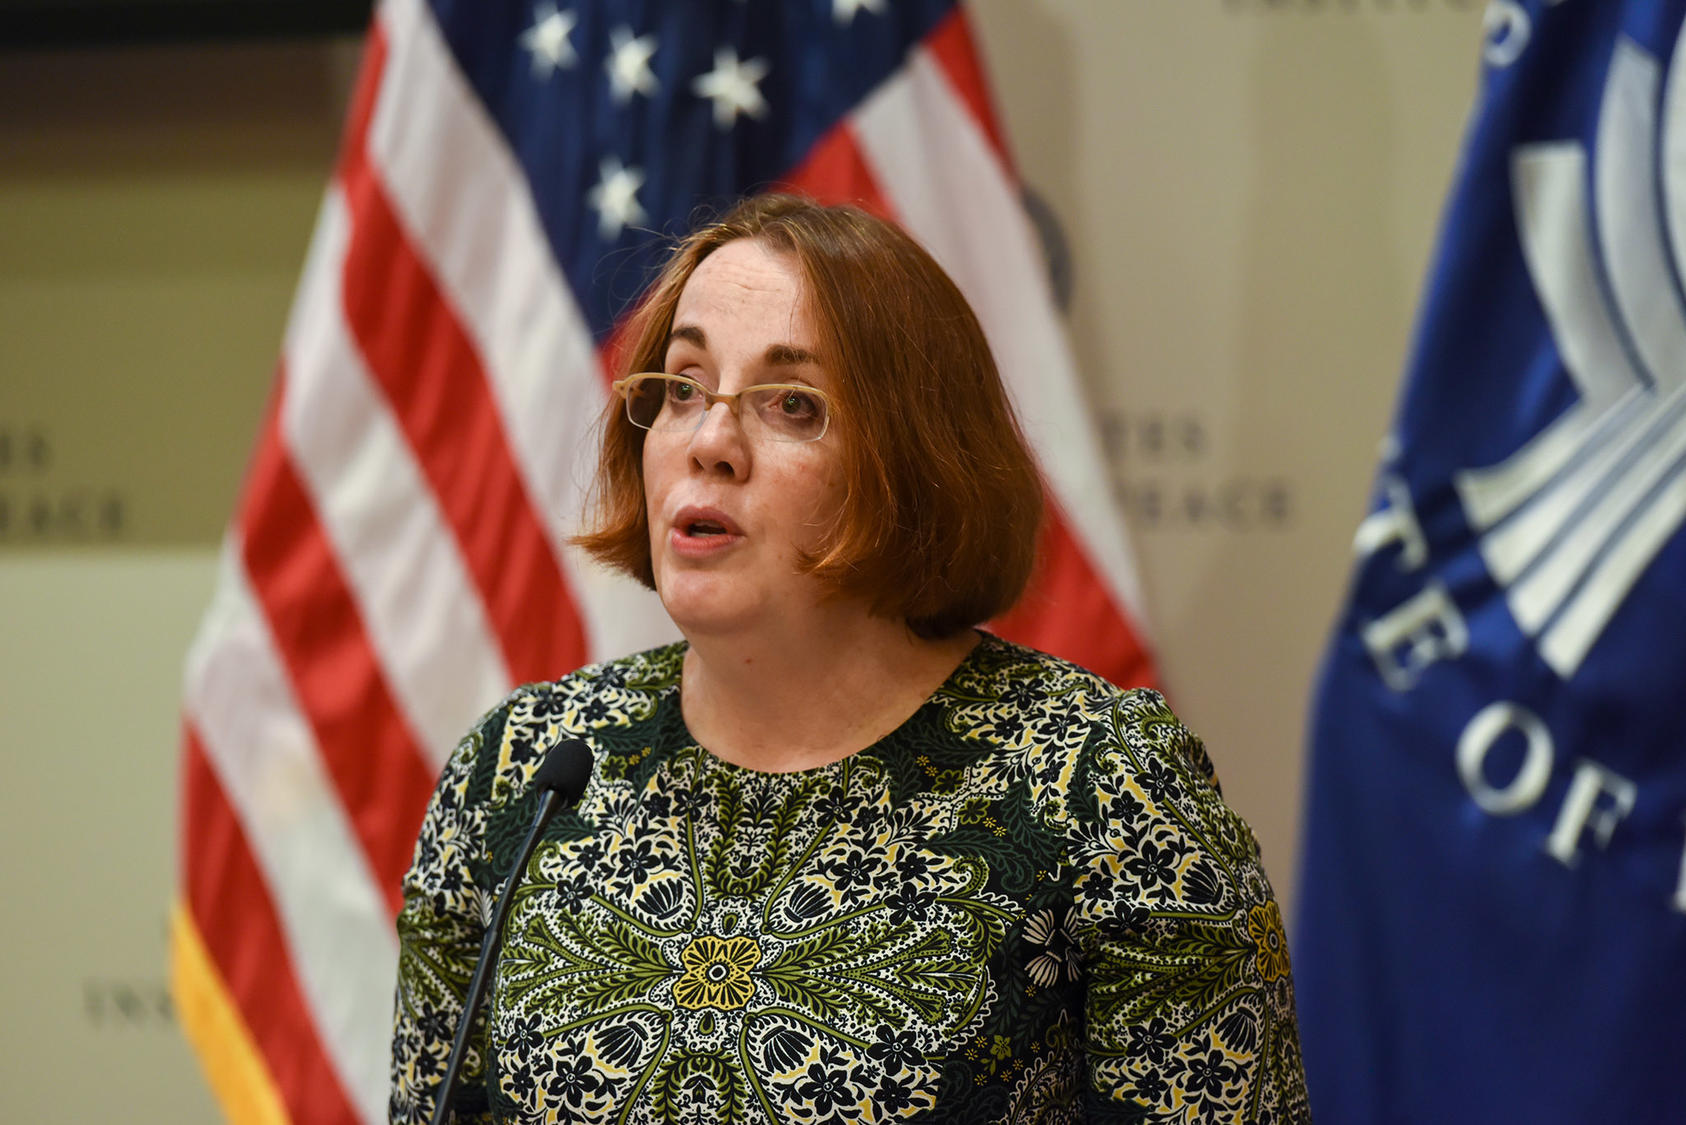 U.S. deputy Special Representative for Afghanistan Reconciliation Molly Phee gave the U.S. negotiating team’s first official statement on the U.S.-Taliban deal at USIP, Feb. 18, 2020.